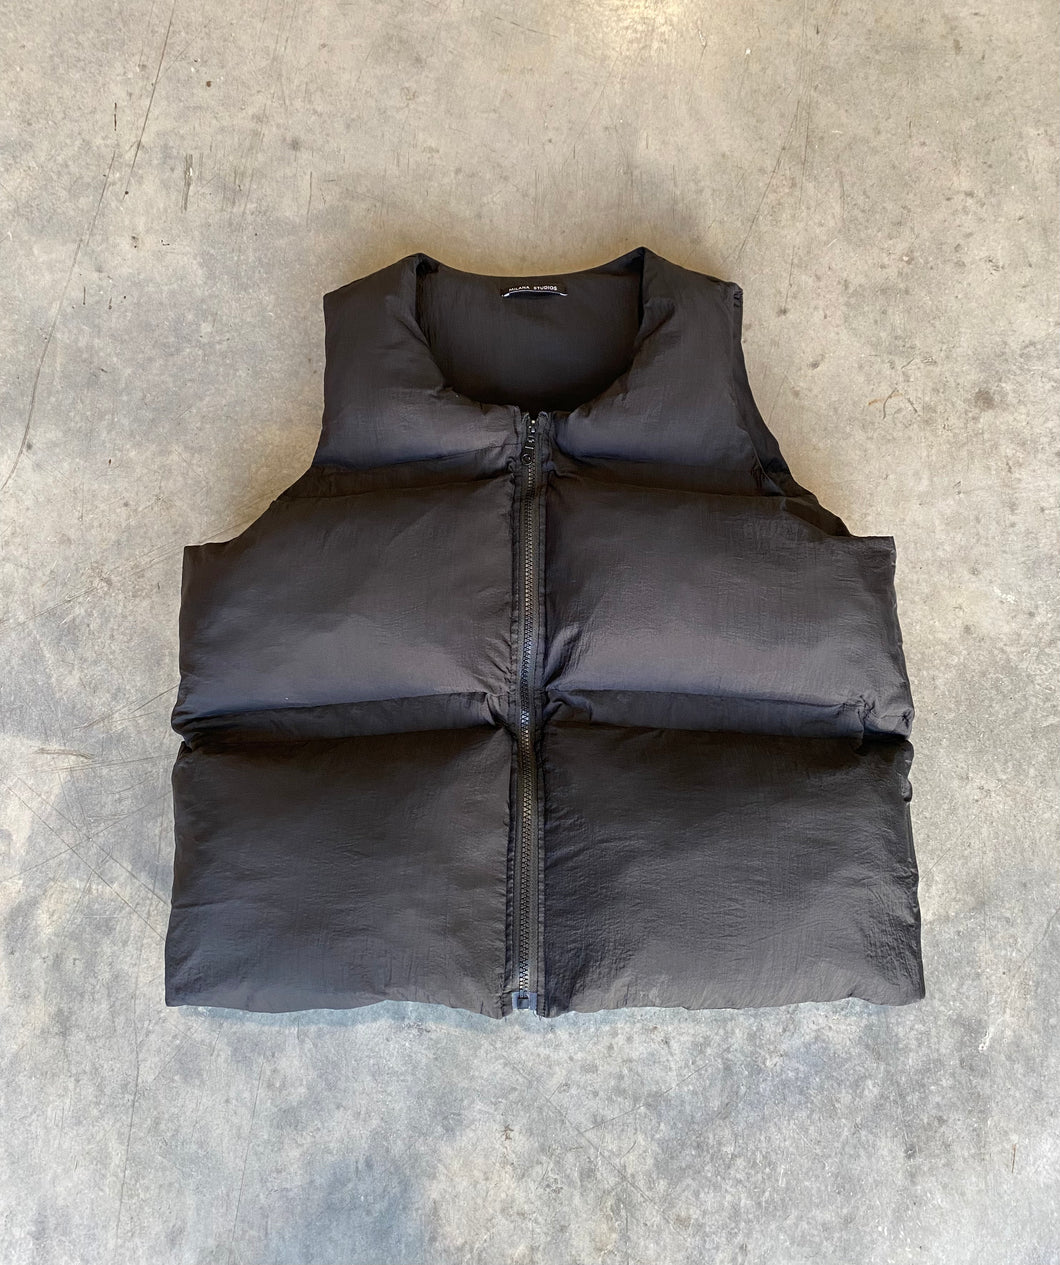 Black Insulated Puffer Gilet.